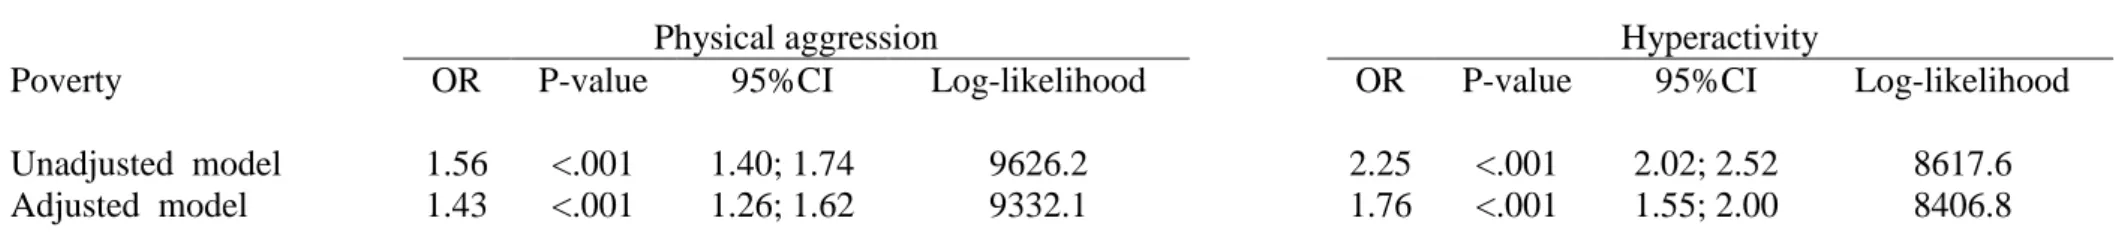 Table  4.  Logistic  regression  models  of  poverty  predicting  a  child’s  membership  in  the  high  trajectory  groups  of  physical  aggression  and  hyperactivity